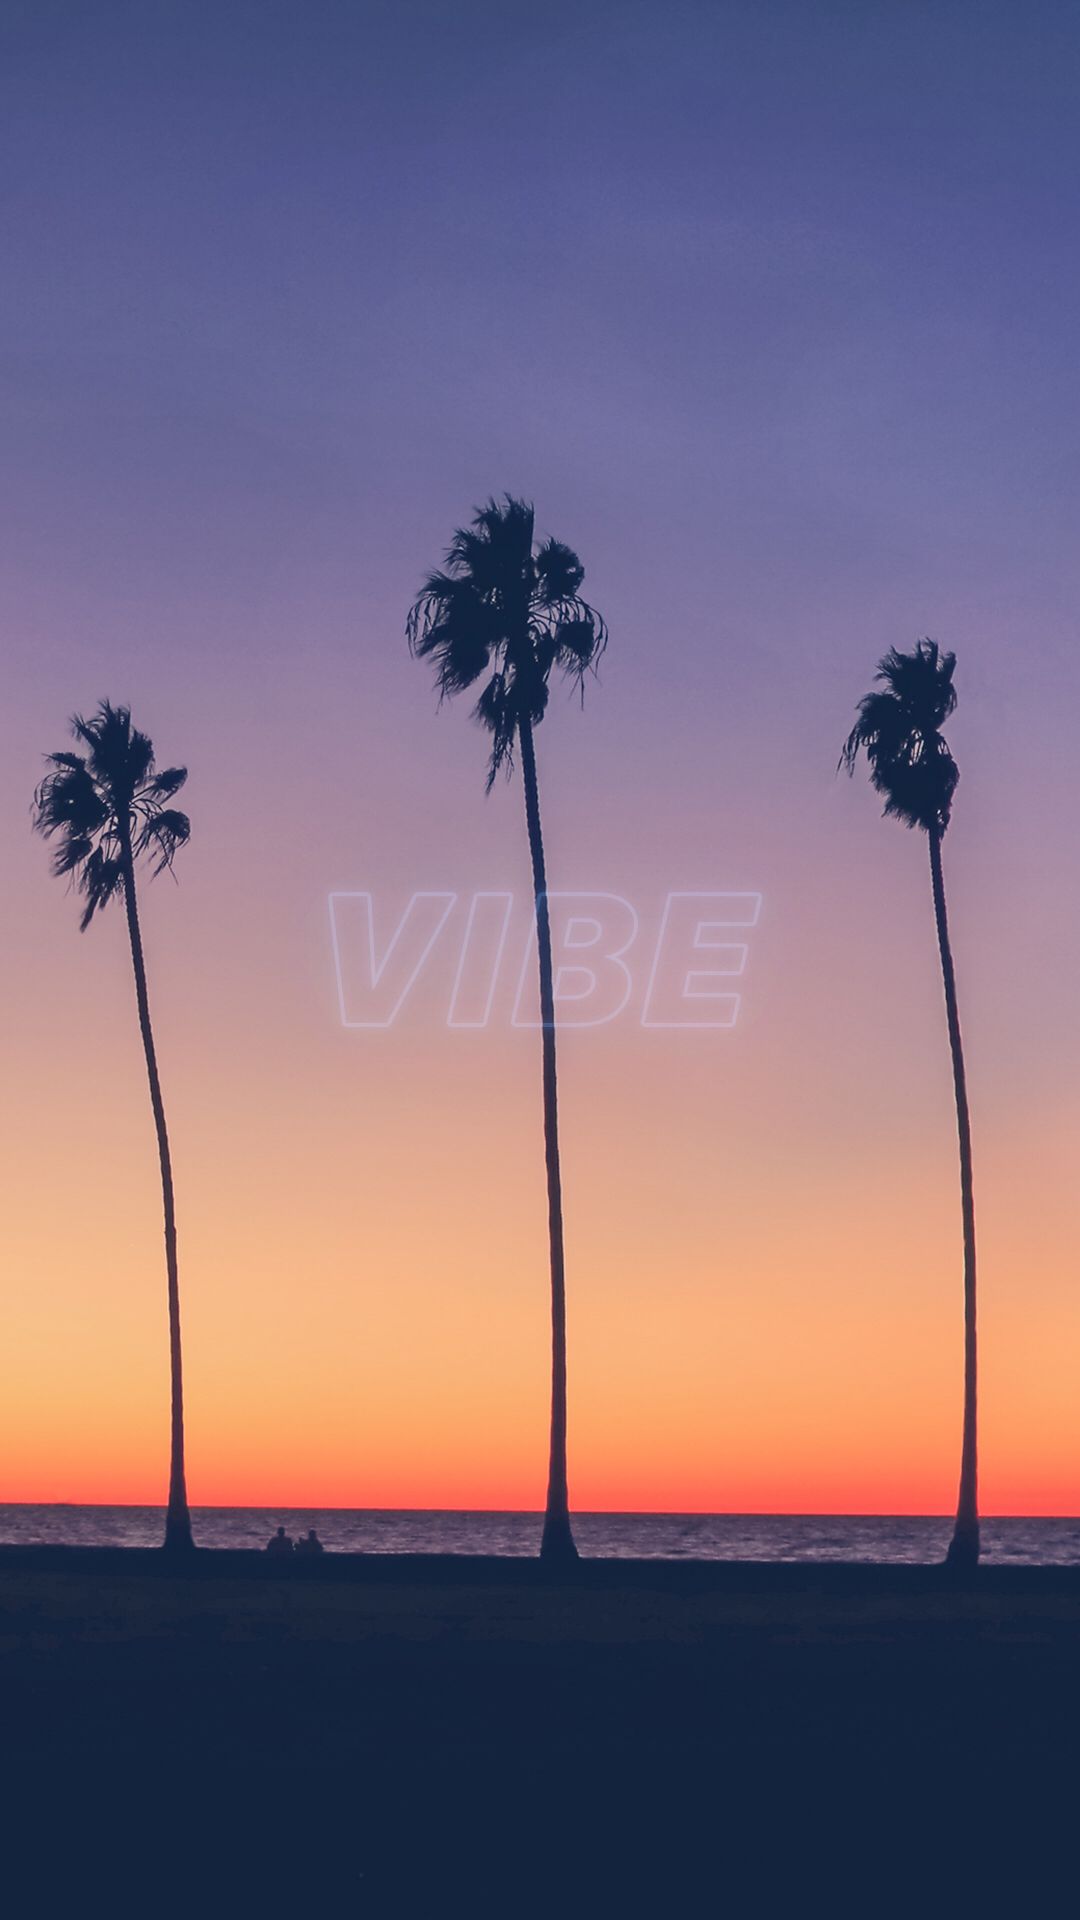 Sunset wallpaper for your iPhone XS from Vibe App #sunset #beach